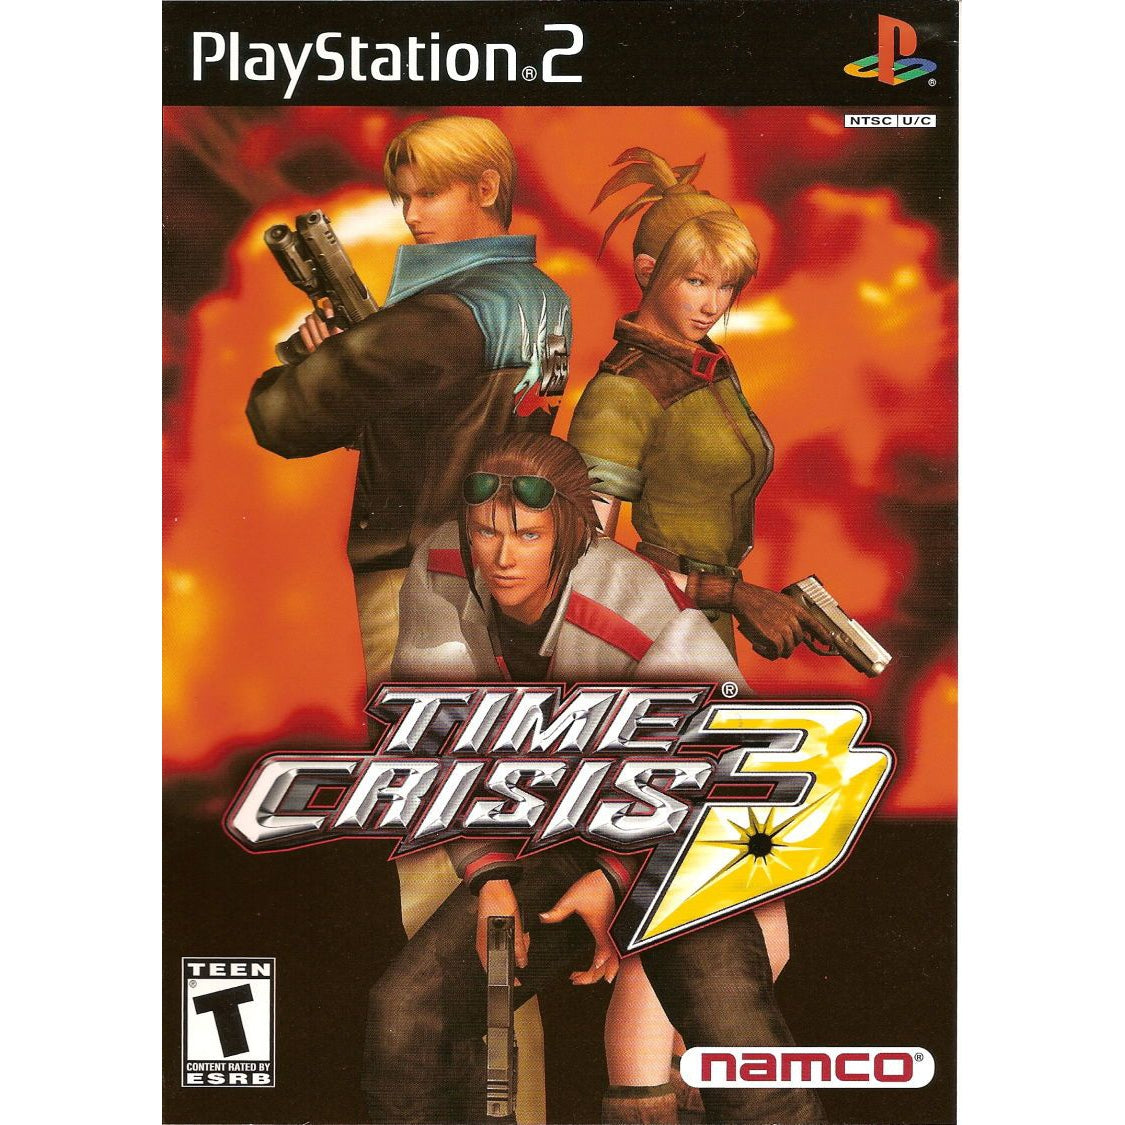 Time Crisis 3 - PlayStation 2 (PS2) Game Complete - YourGamingShop.com - Buy, Sell, Trade Video Games Online. 120 Day Warranty. Satisfaction Guaranteed.